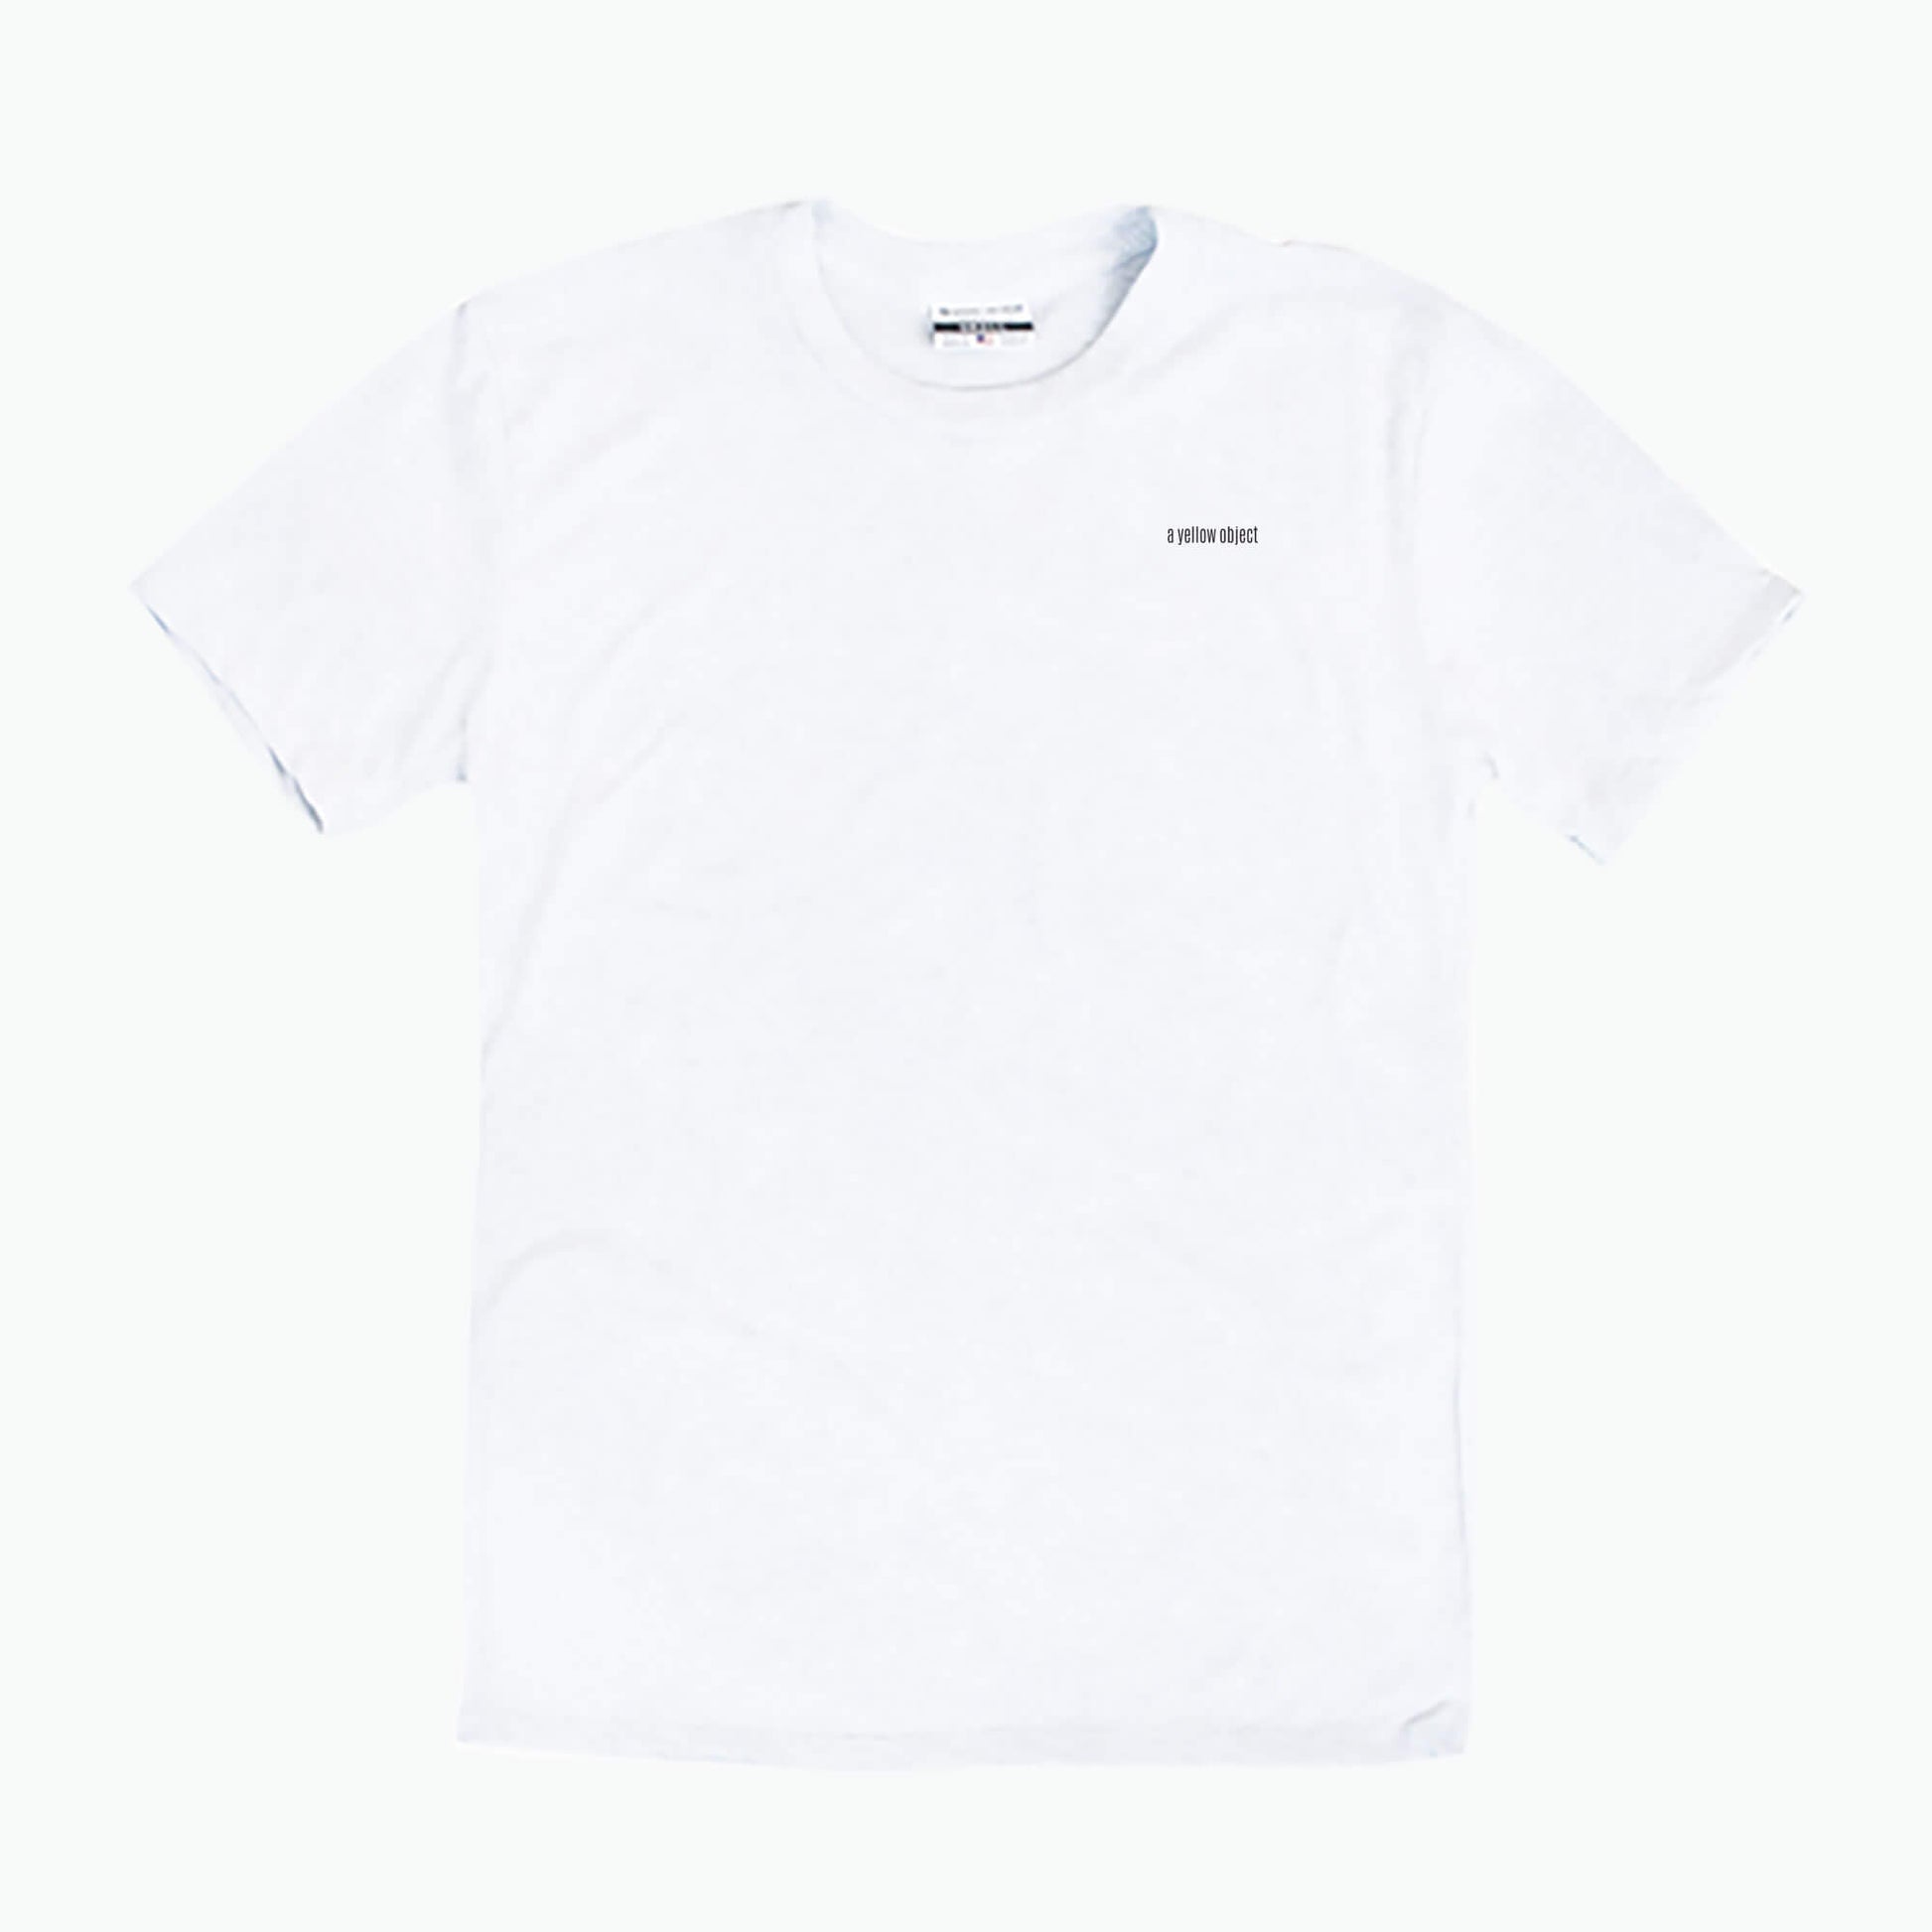 Salted Fish T-Shirt (White) - A Yellow Object